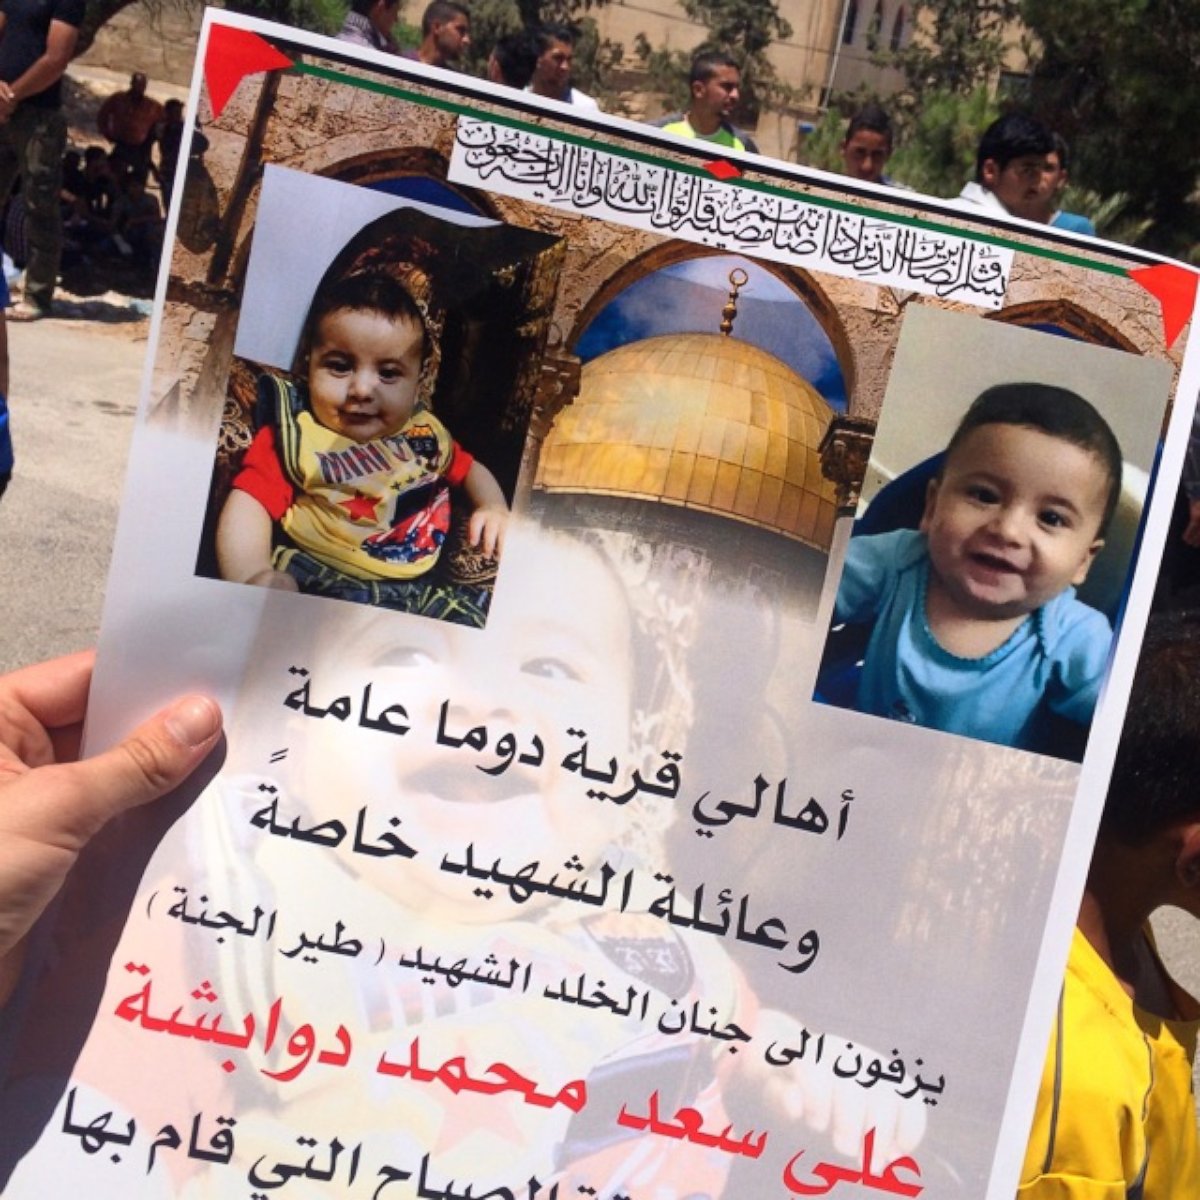 PHOTO: Within hours of his death, posters with 18 month year-old Ali Dawabsheh’s face were printed and passed out ahead of Friday’s funeral.